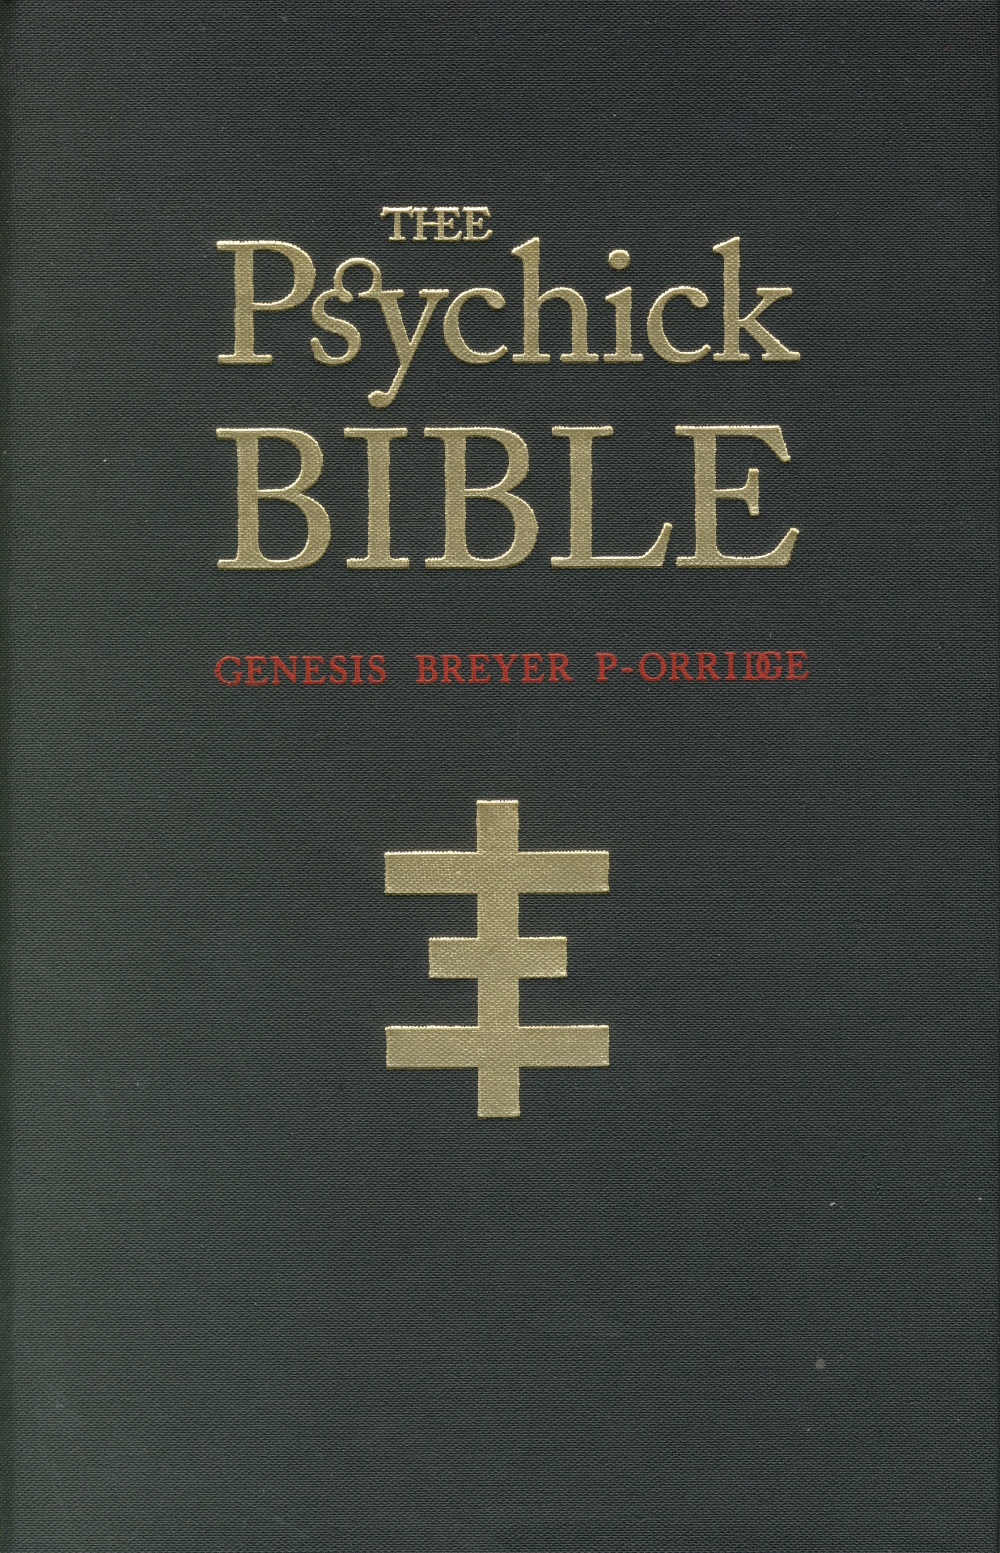 Thee Psychick BIBLE